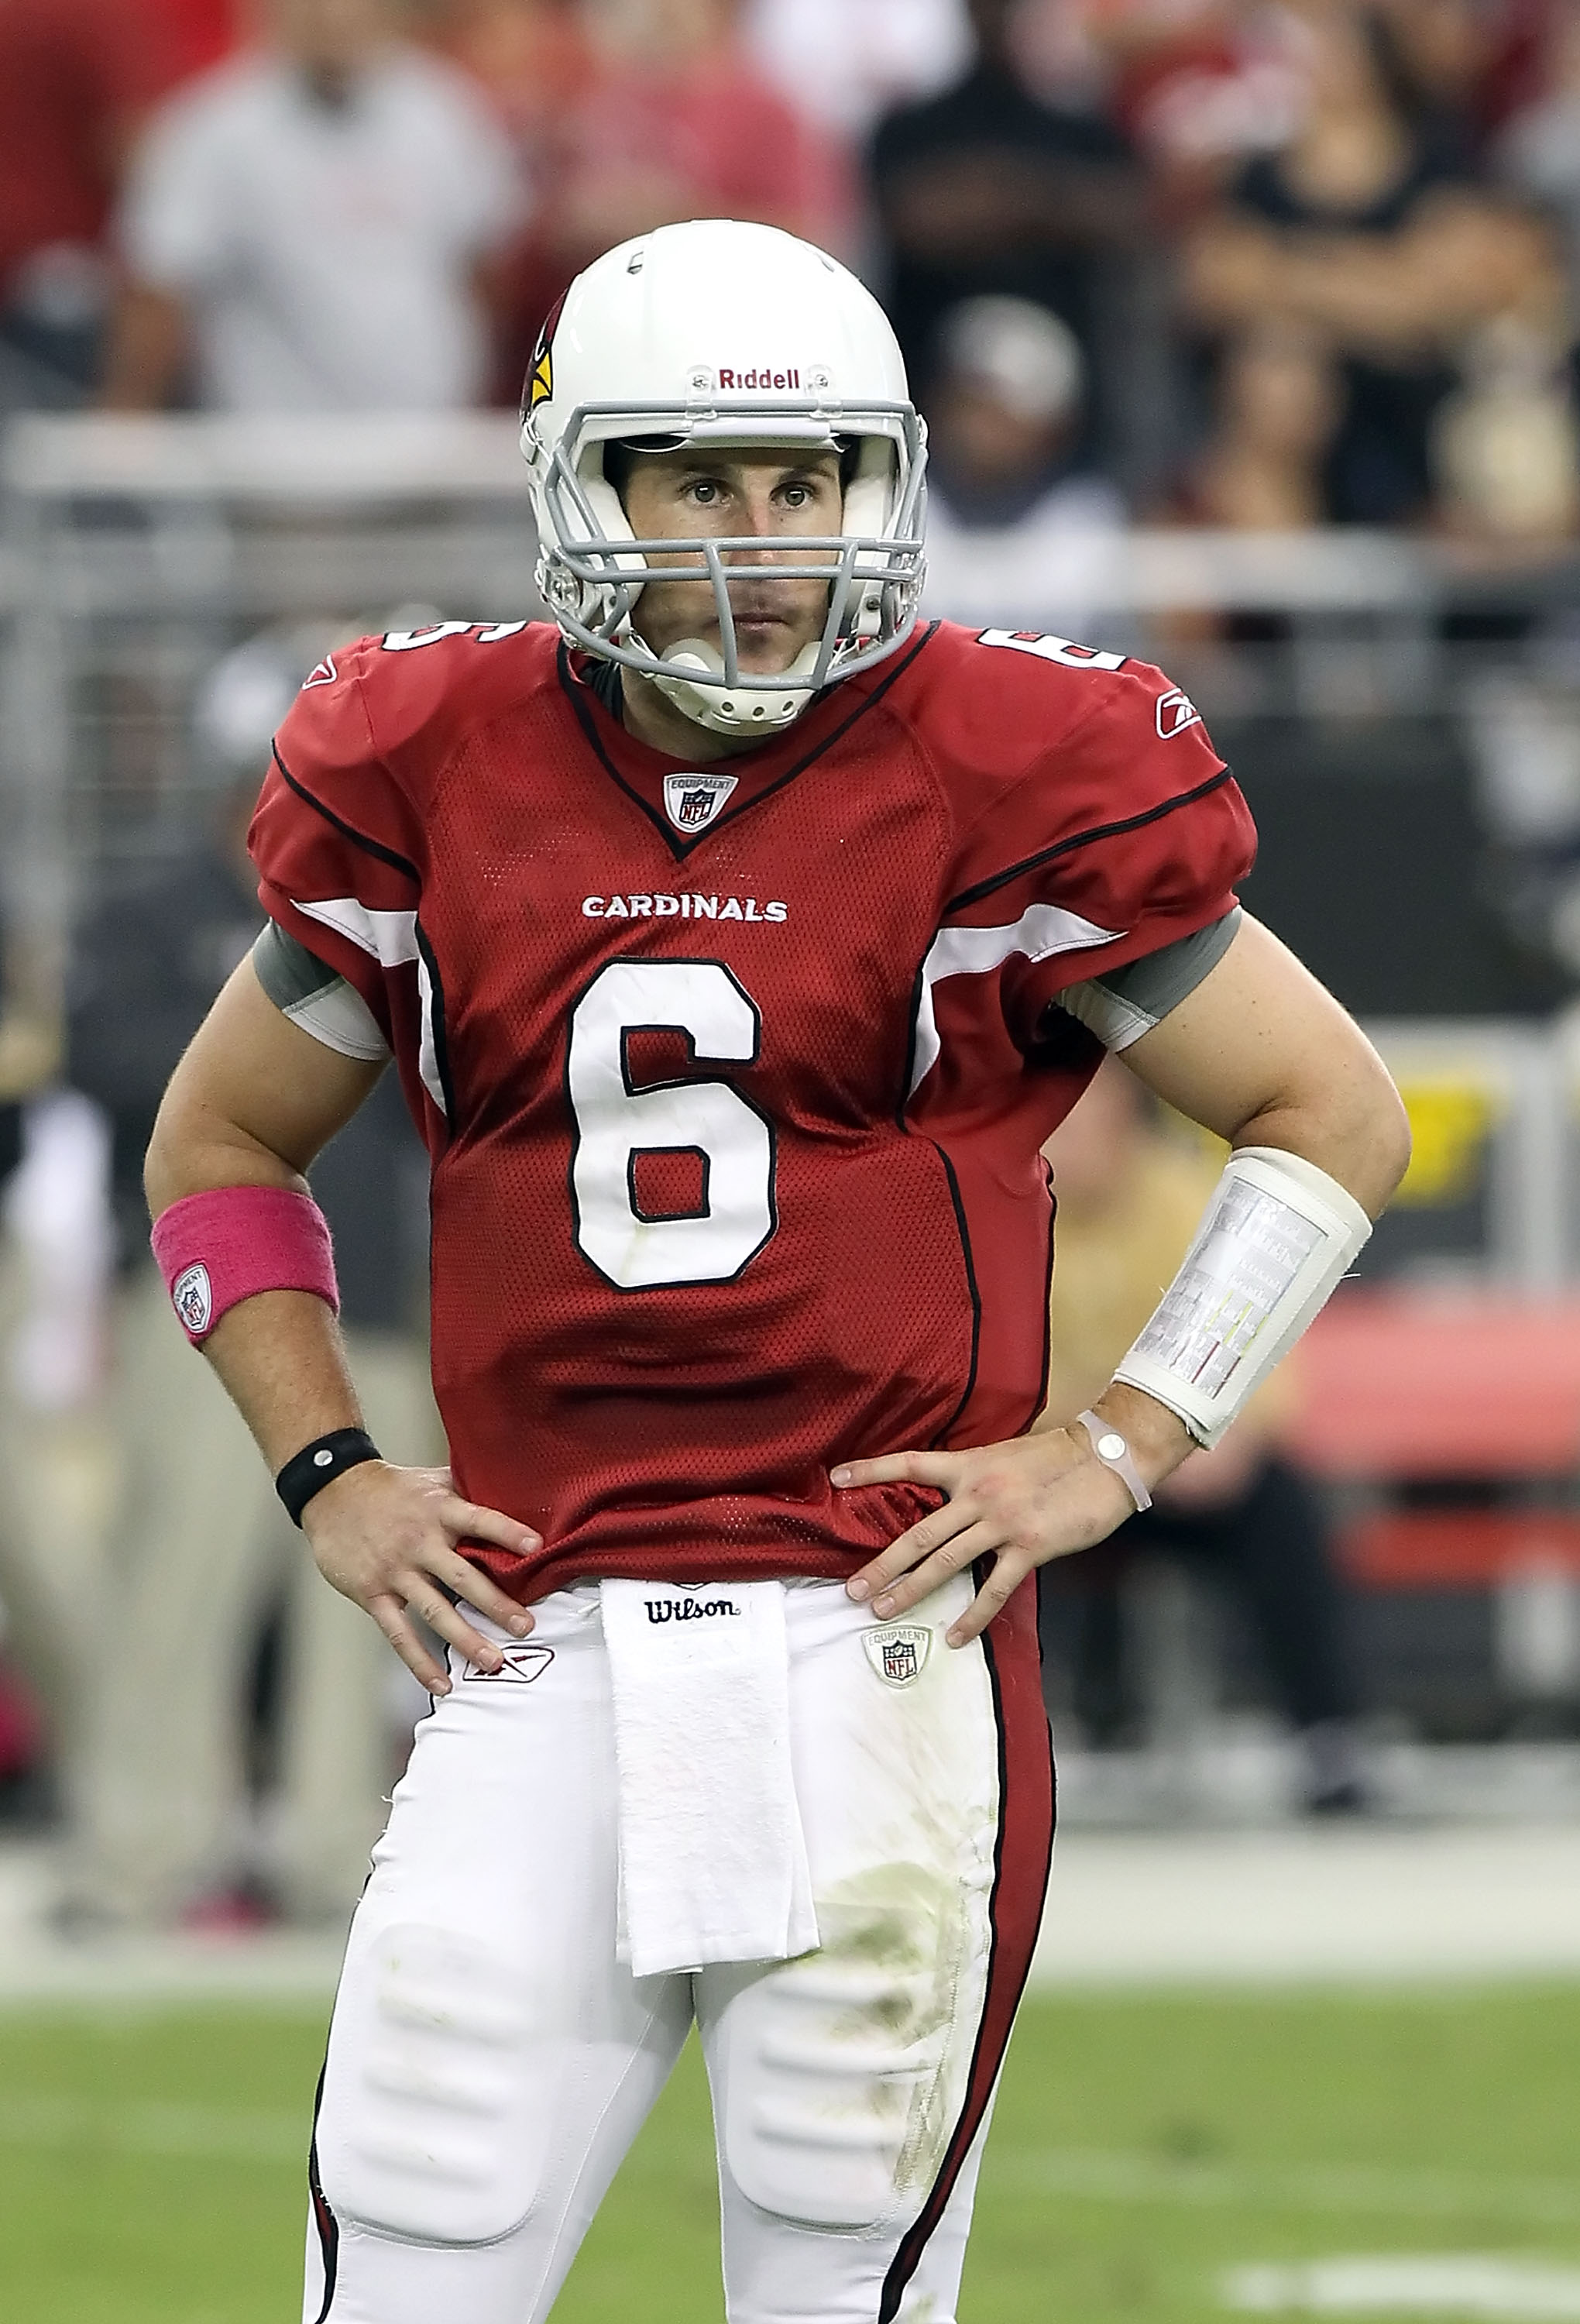 GLENDALE, AZ - OCTOBER 10:  Quarterback Max Hall #6 of the Arizona Cardinals during the NFL game against the New Orleans Saints at the University of Phoenix Stadium on October 10, 2010 in Glendale, Arizona. The Cardinals defeated the Saints 30-20.  (Photo